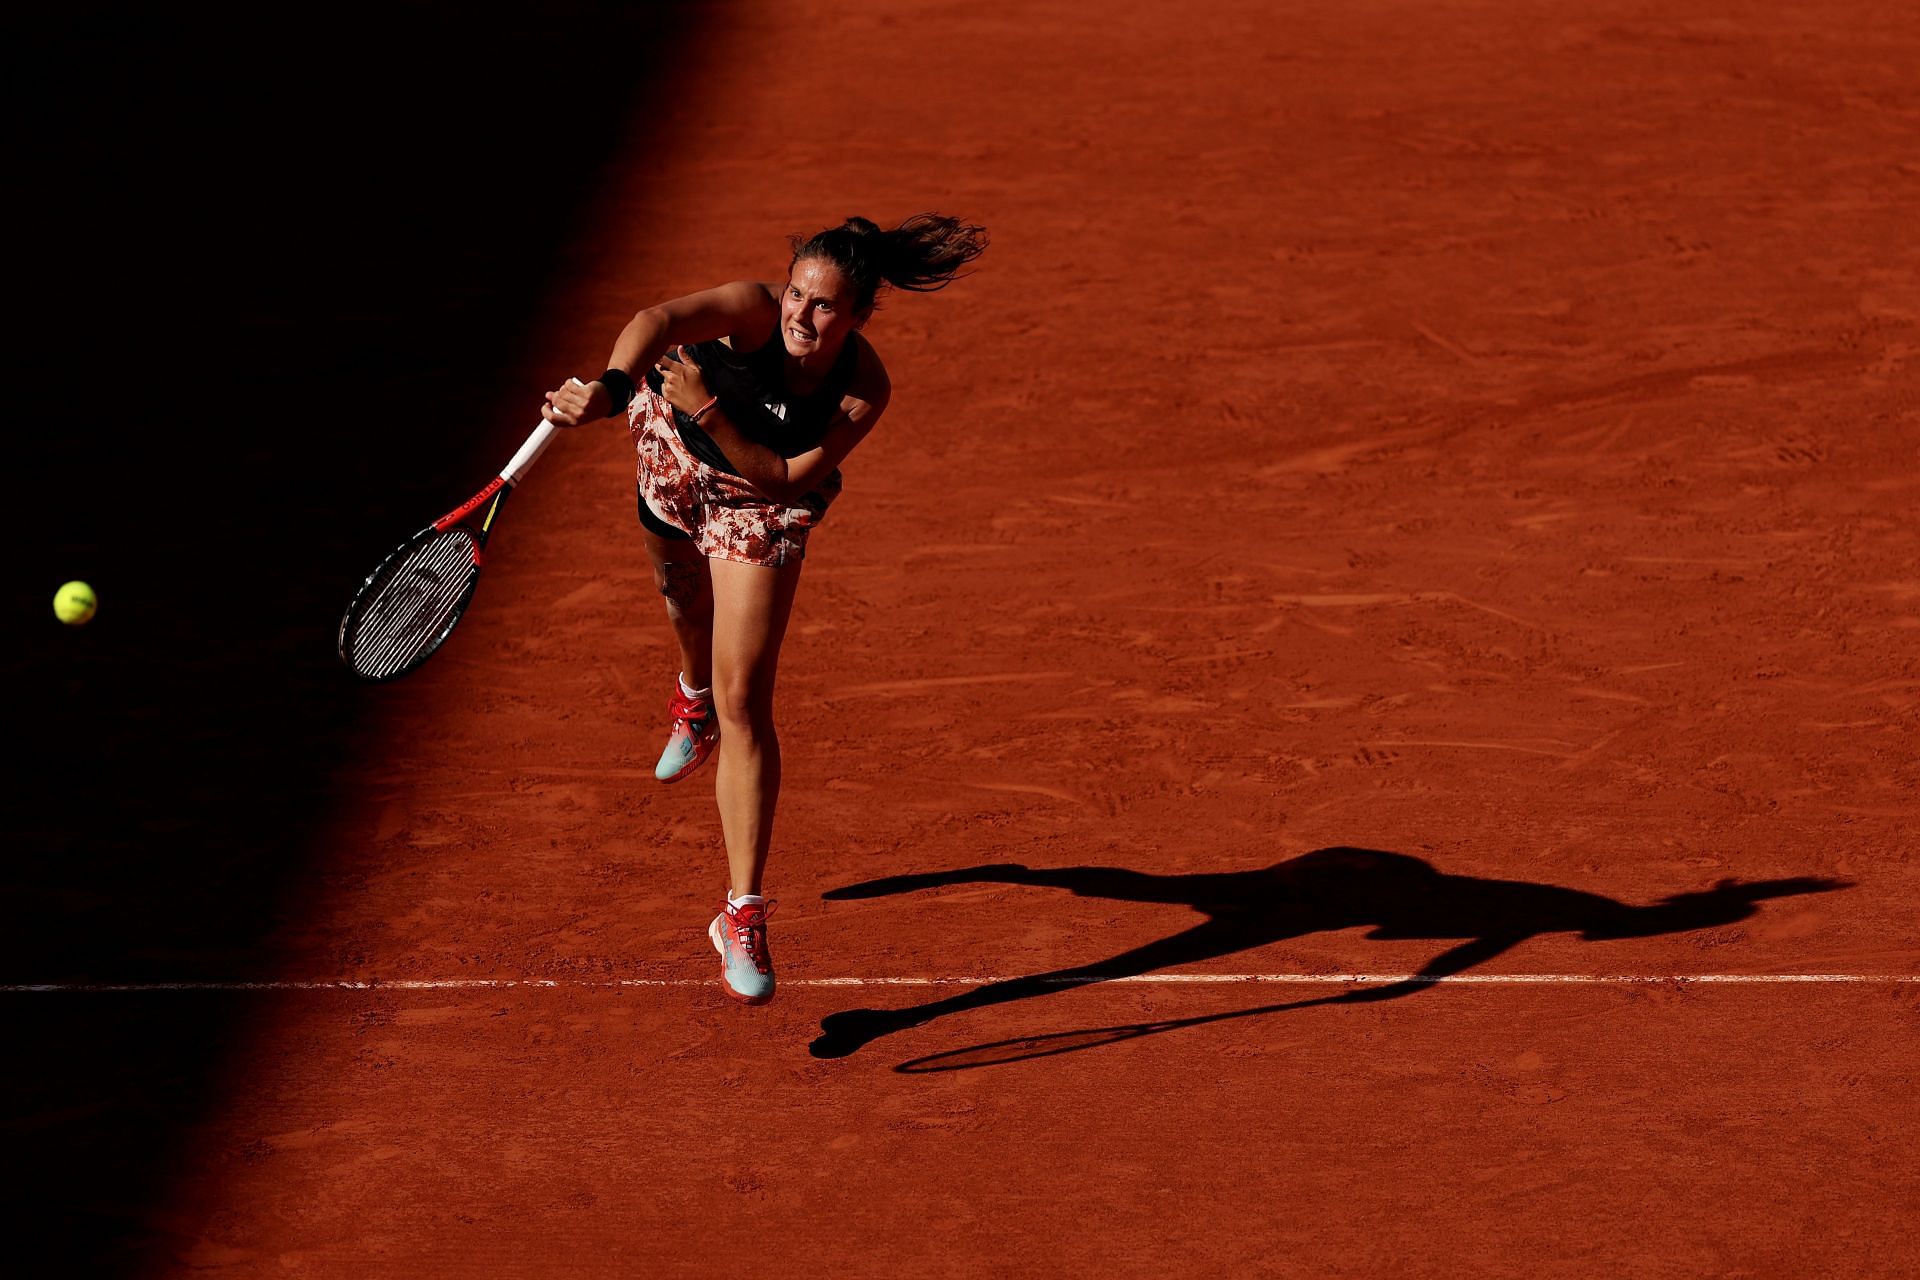 Daria Kasatkina in action at the French Open